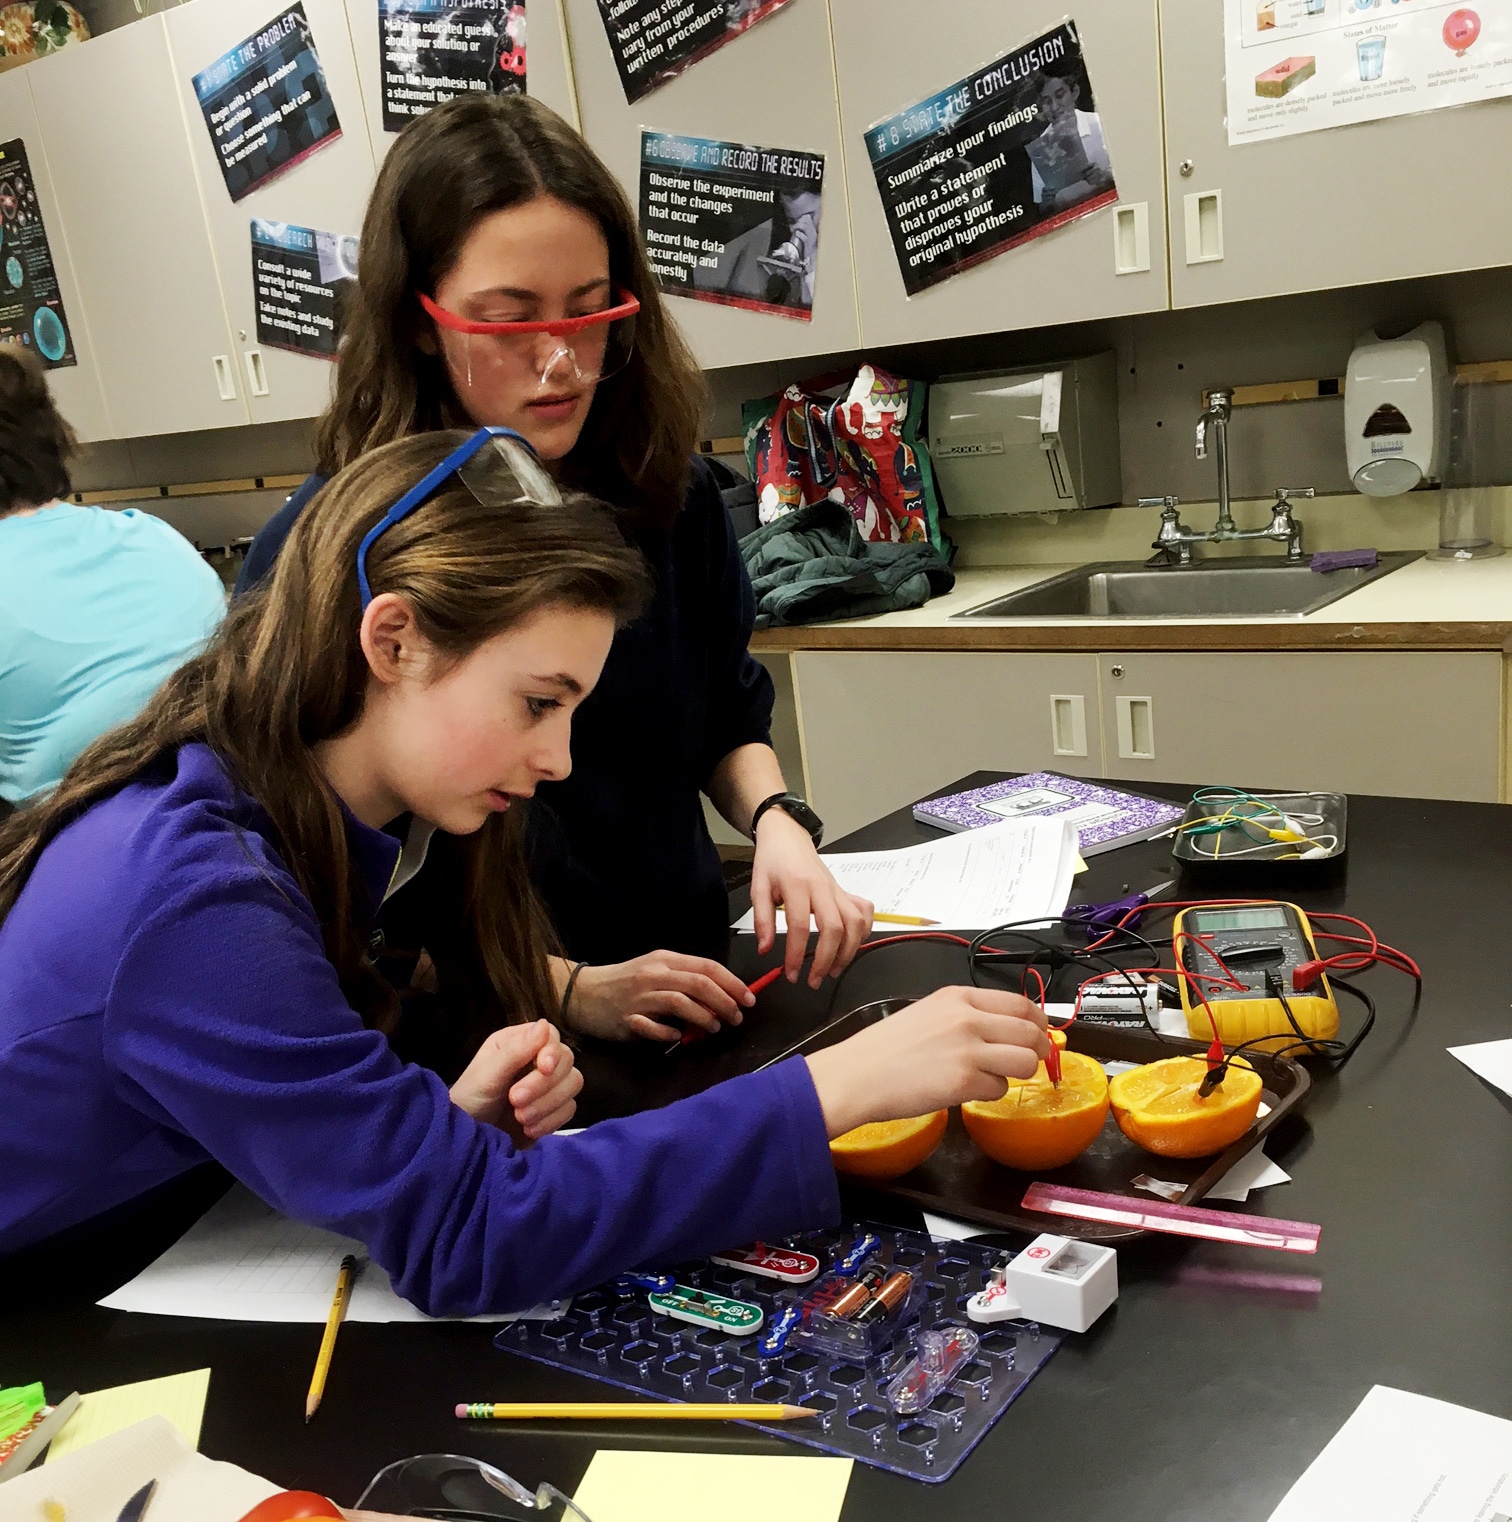 The Great Brook School Lab Girls investigate circuits. (photo © Susie Spikol Faber)